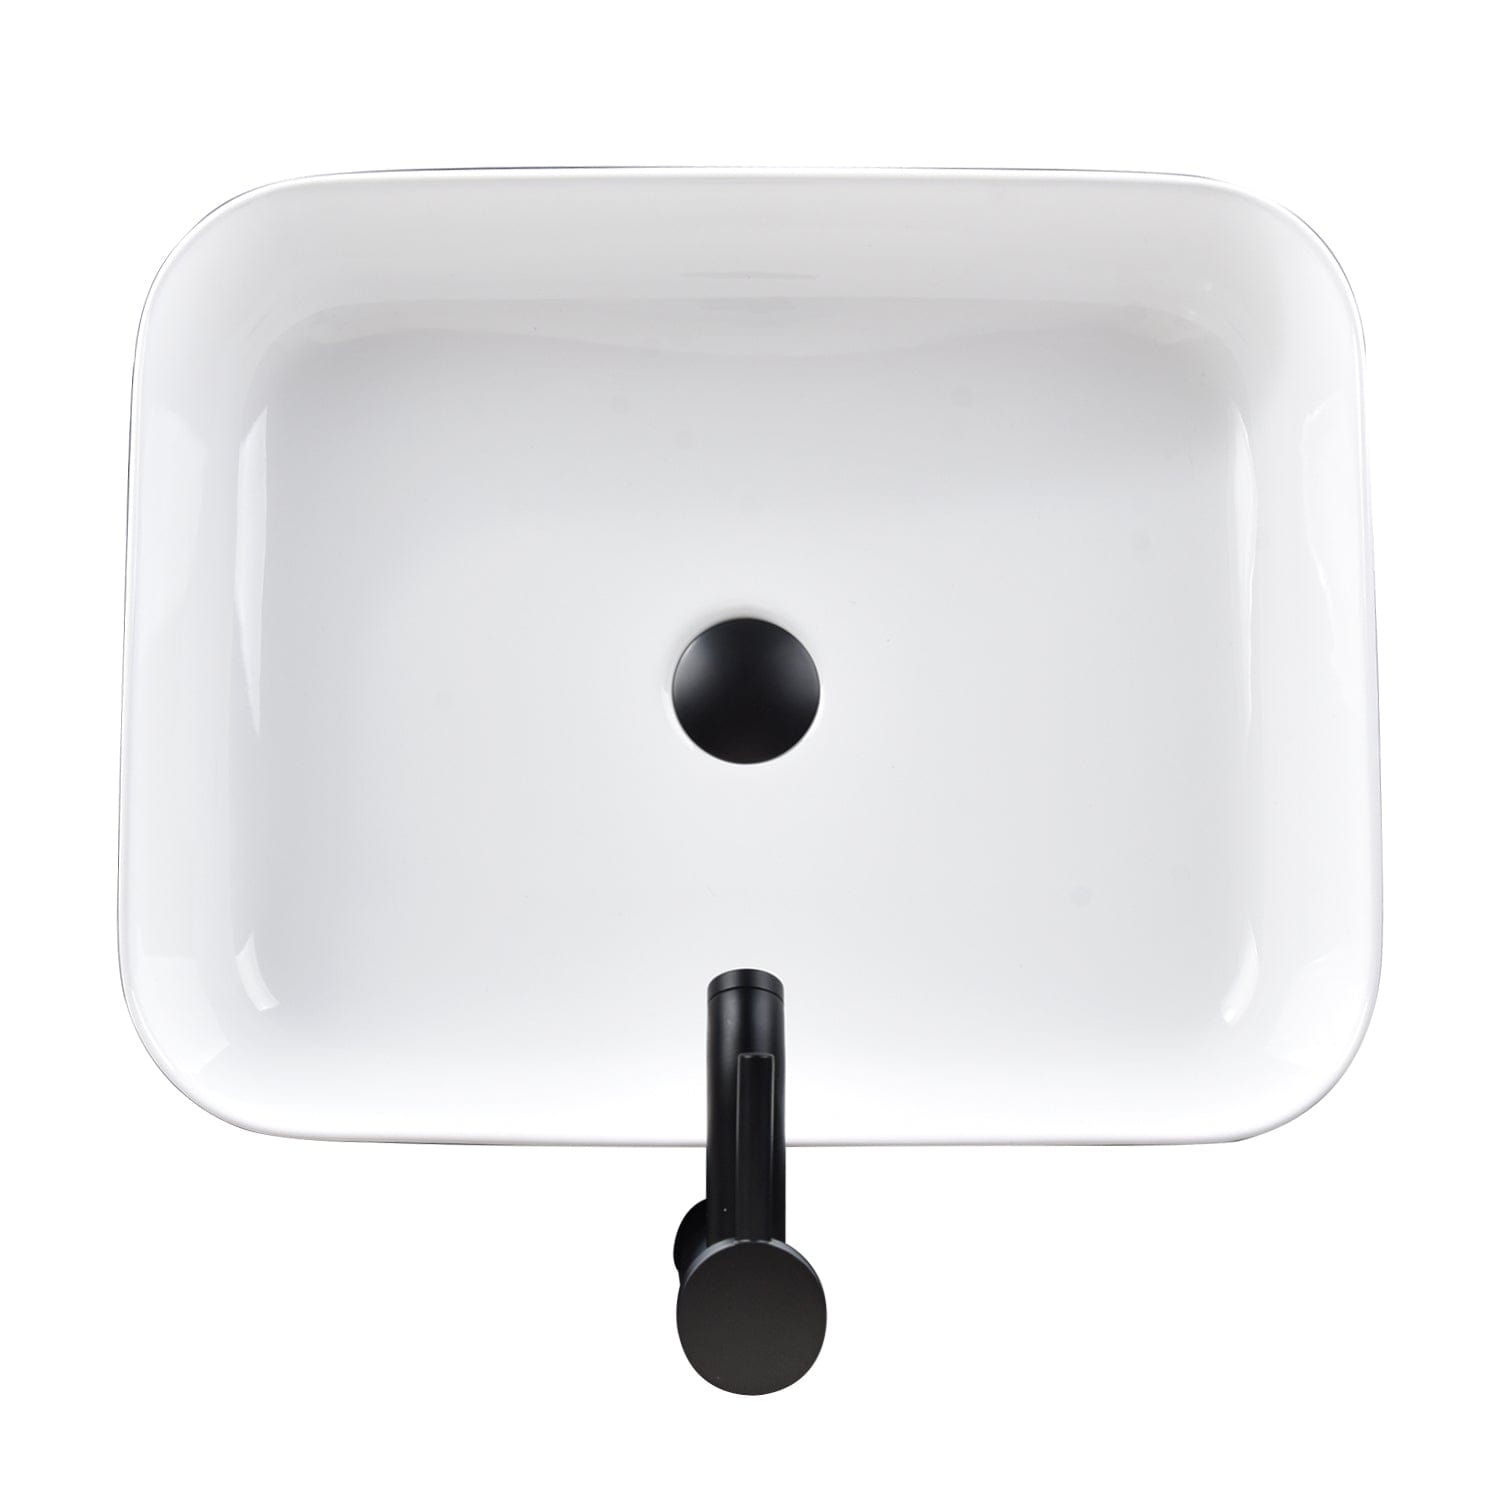 Above view of Elecwish Vessel Sinks Black and White Ceramic Bathroom Sink Faucet and Drain Combo,Rectangle